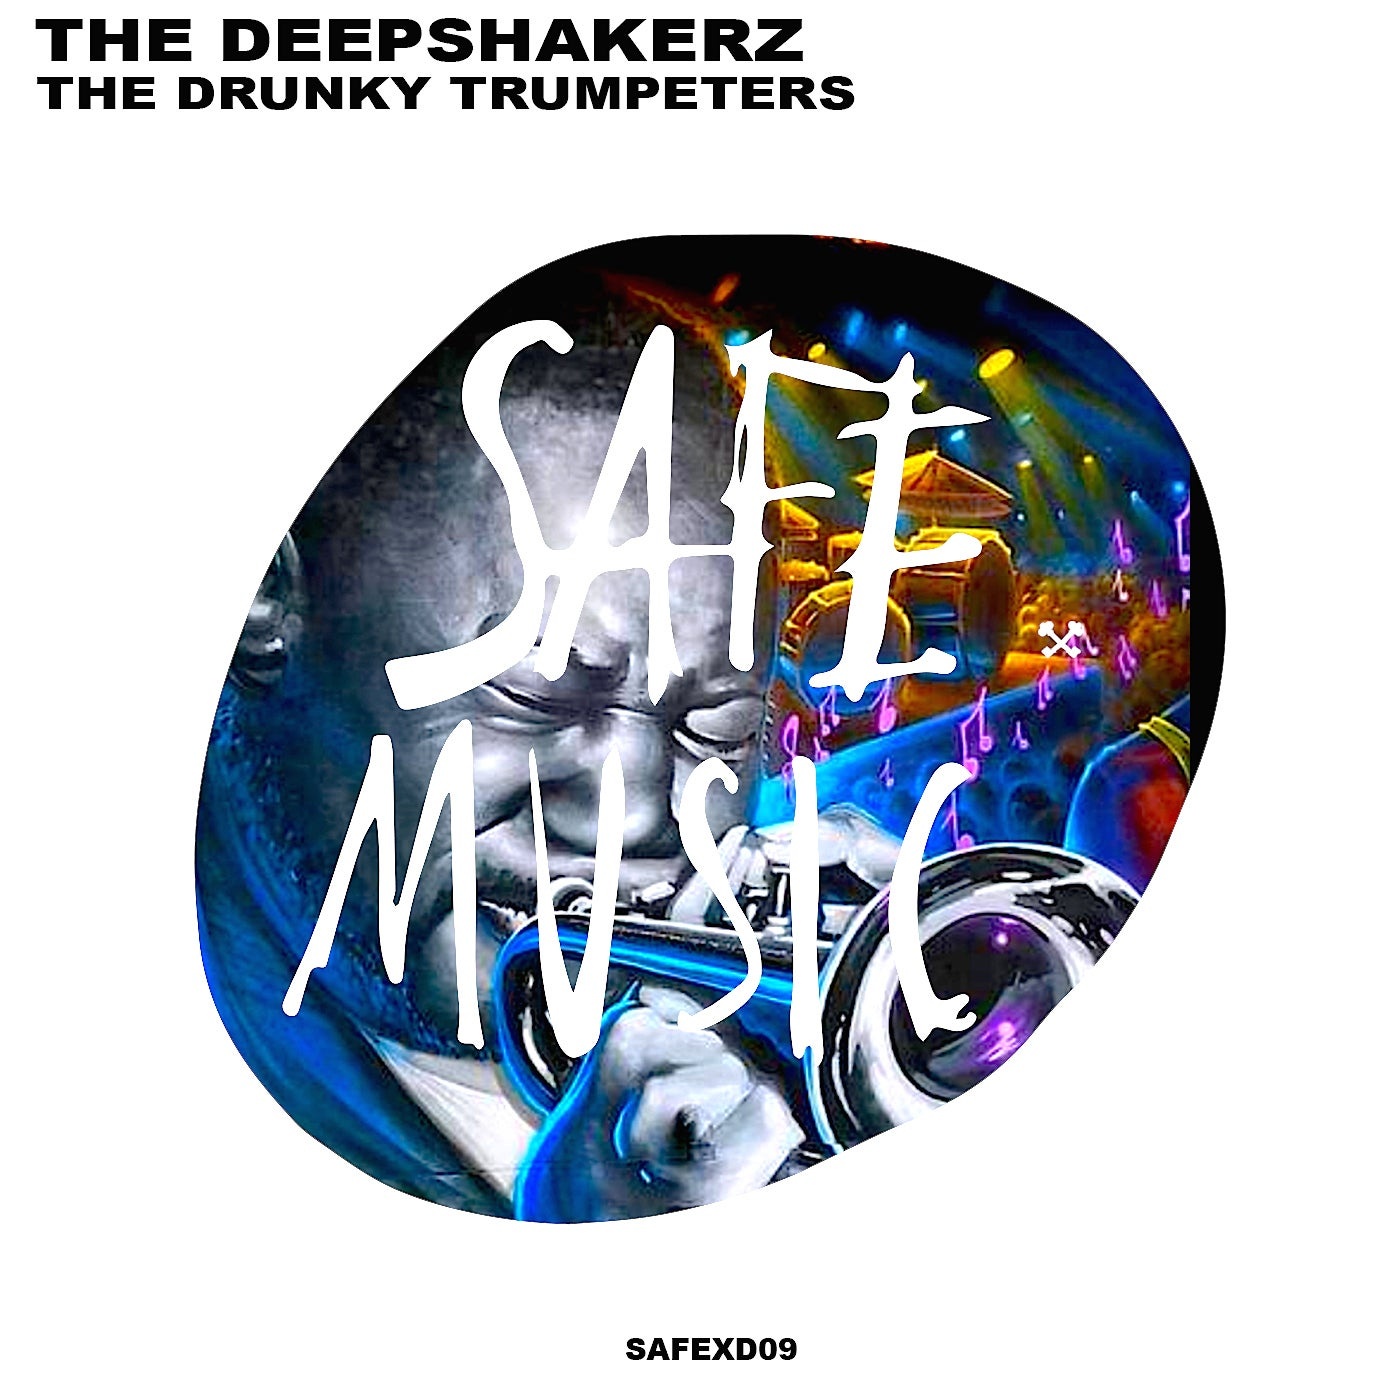 image cover: The Deepshakerz - The Drunky Trumpeters / SAFEXD09B